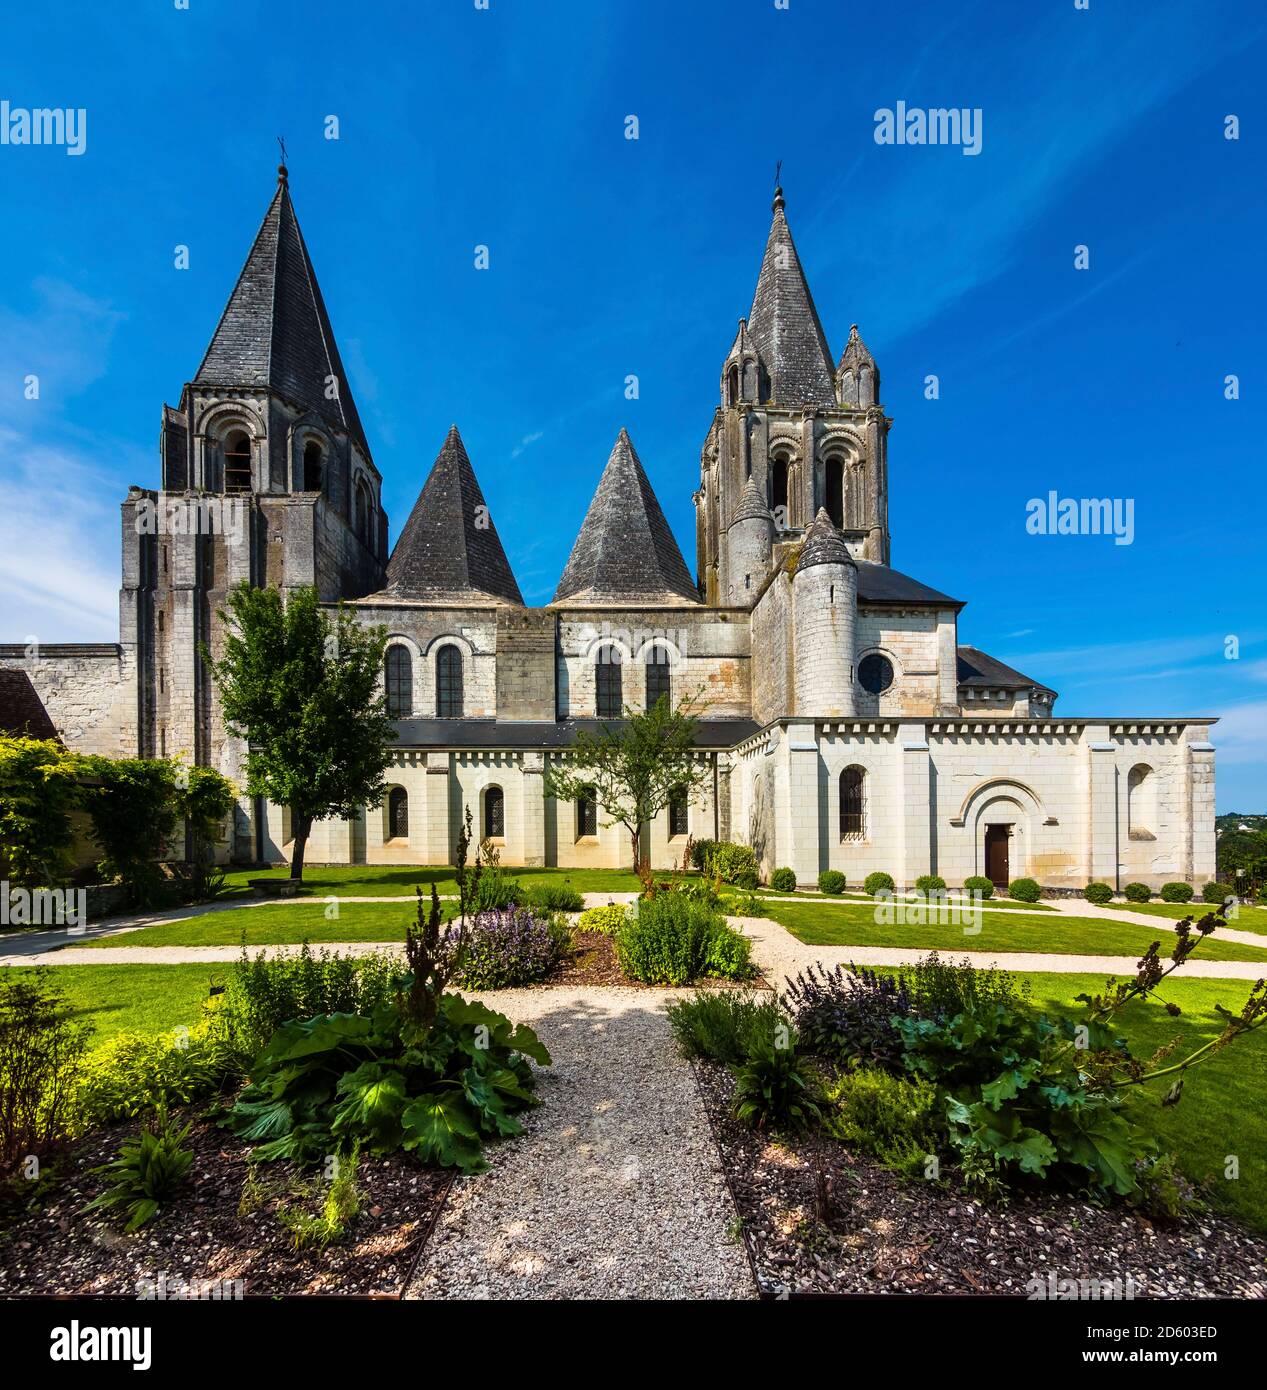 France, Loches, view to Collegiale Saint-Ours at Loches castle Stock Photo